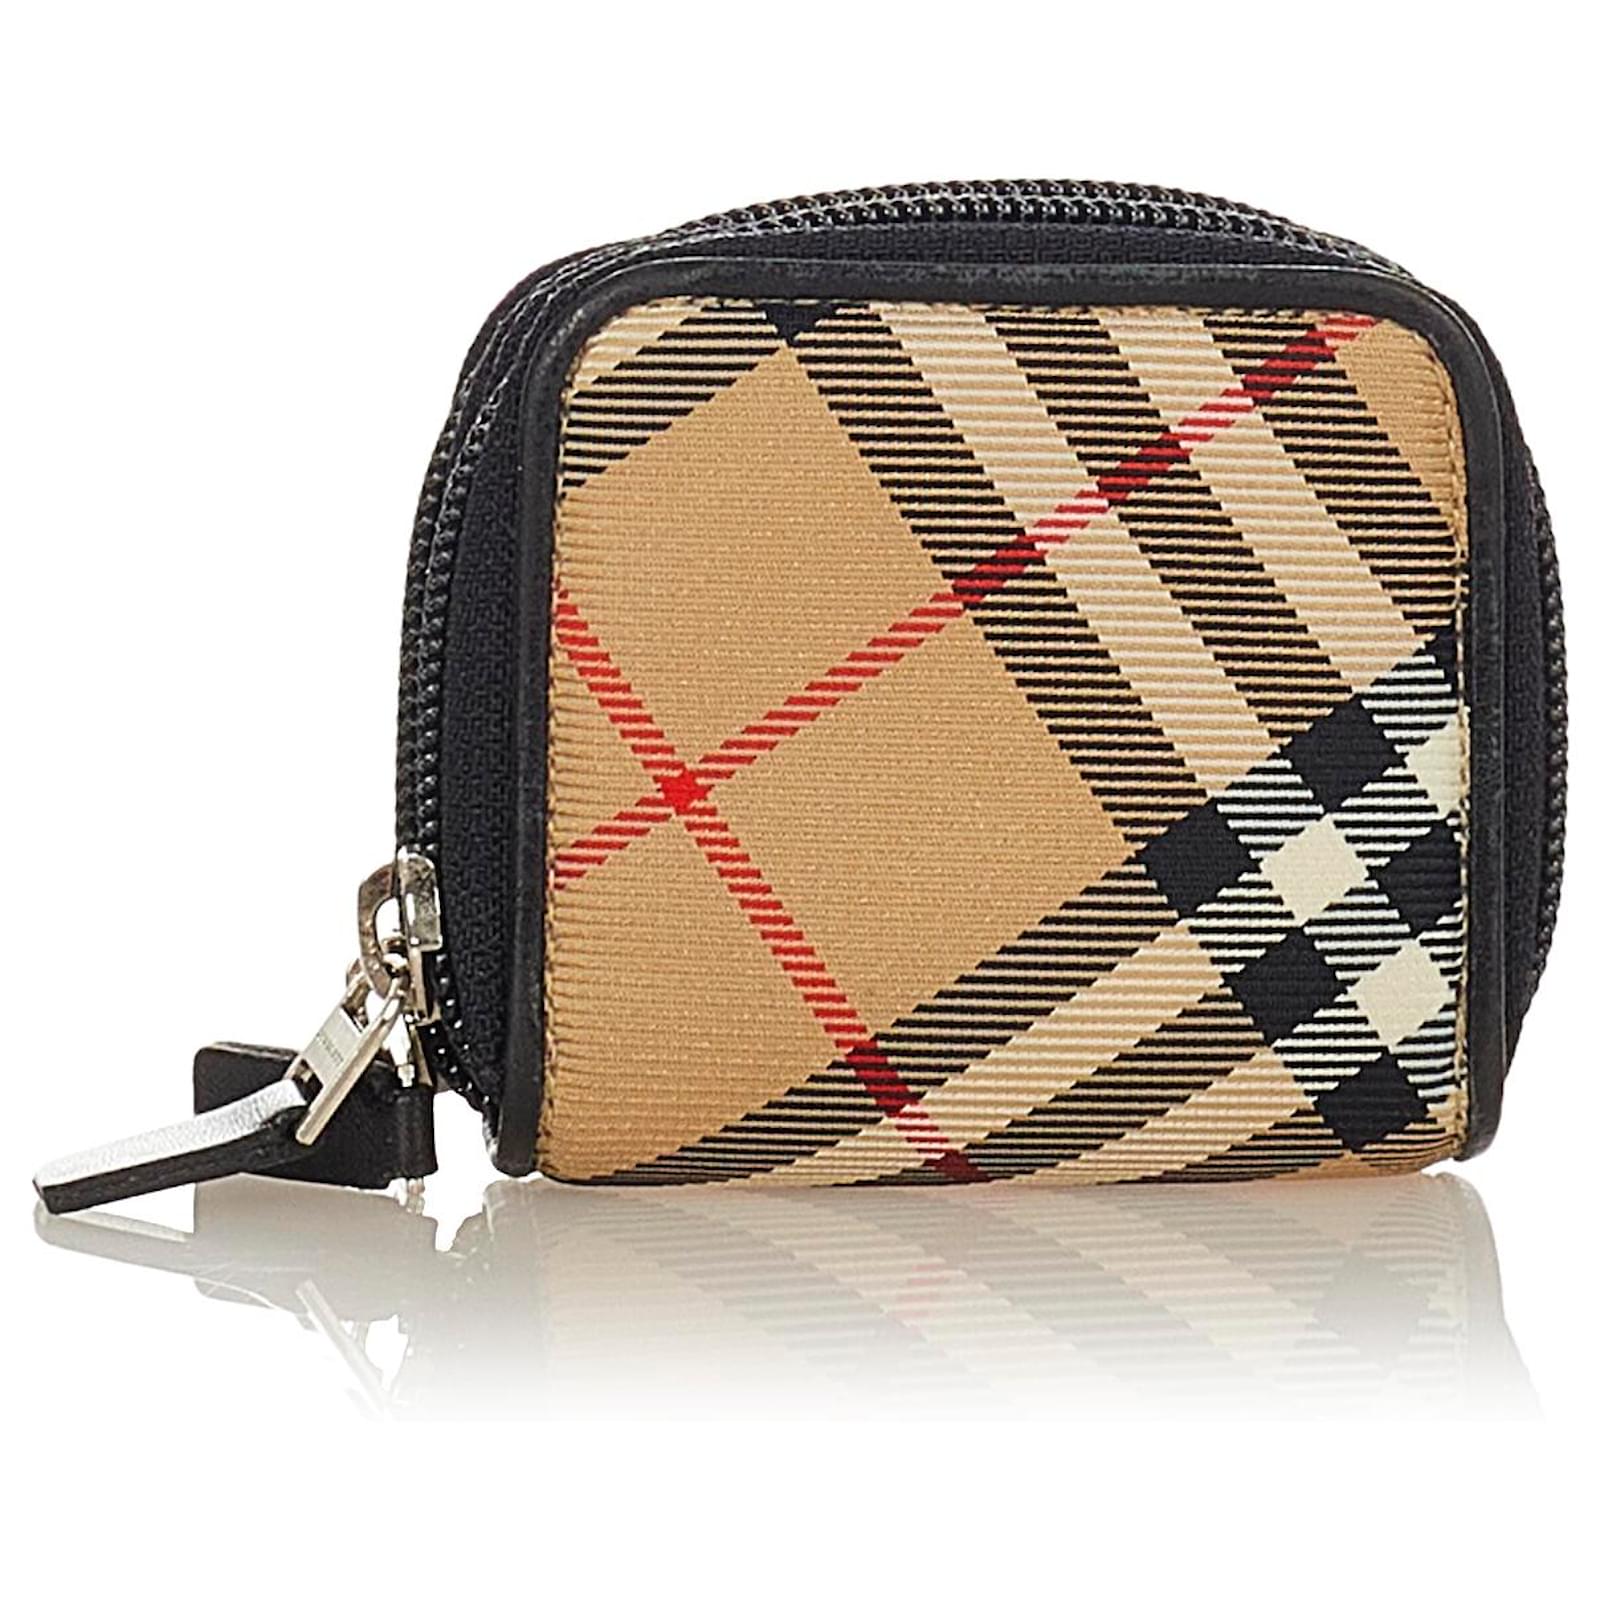 Burberry Vintage Check Coin Purse for Women